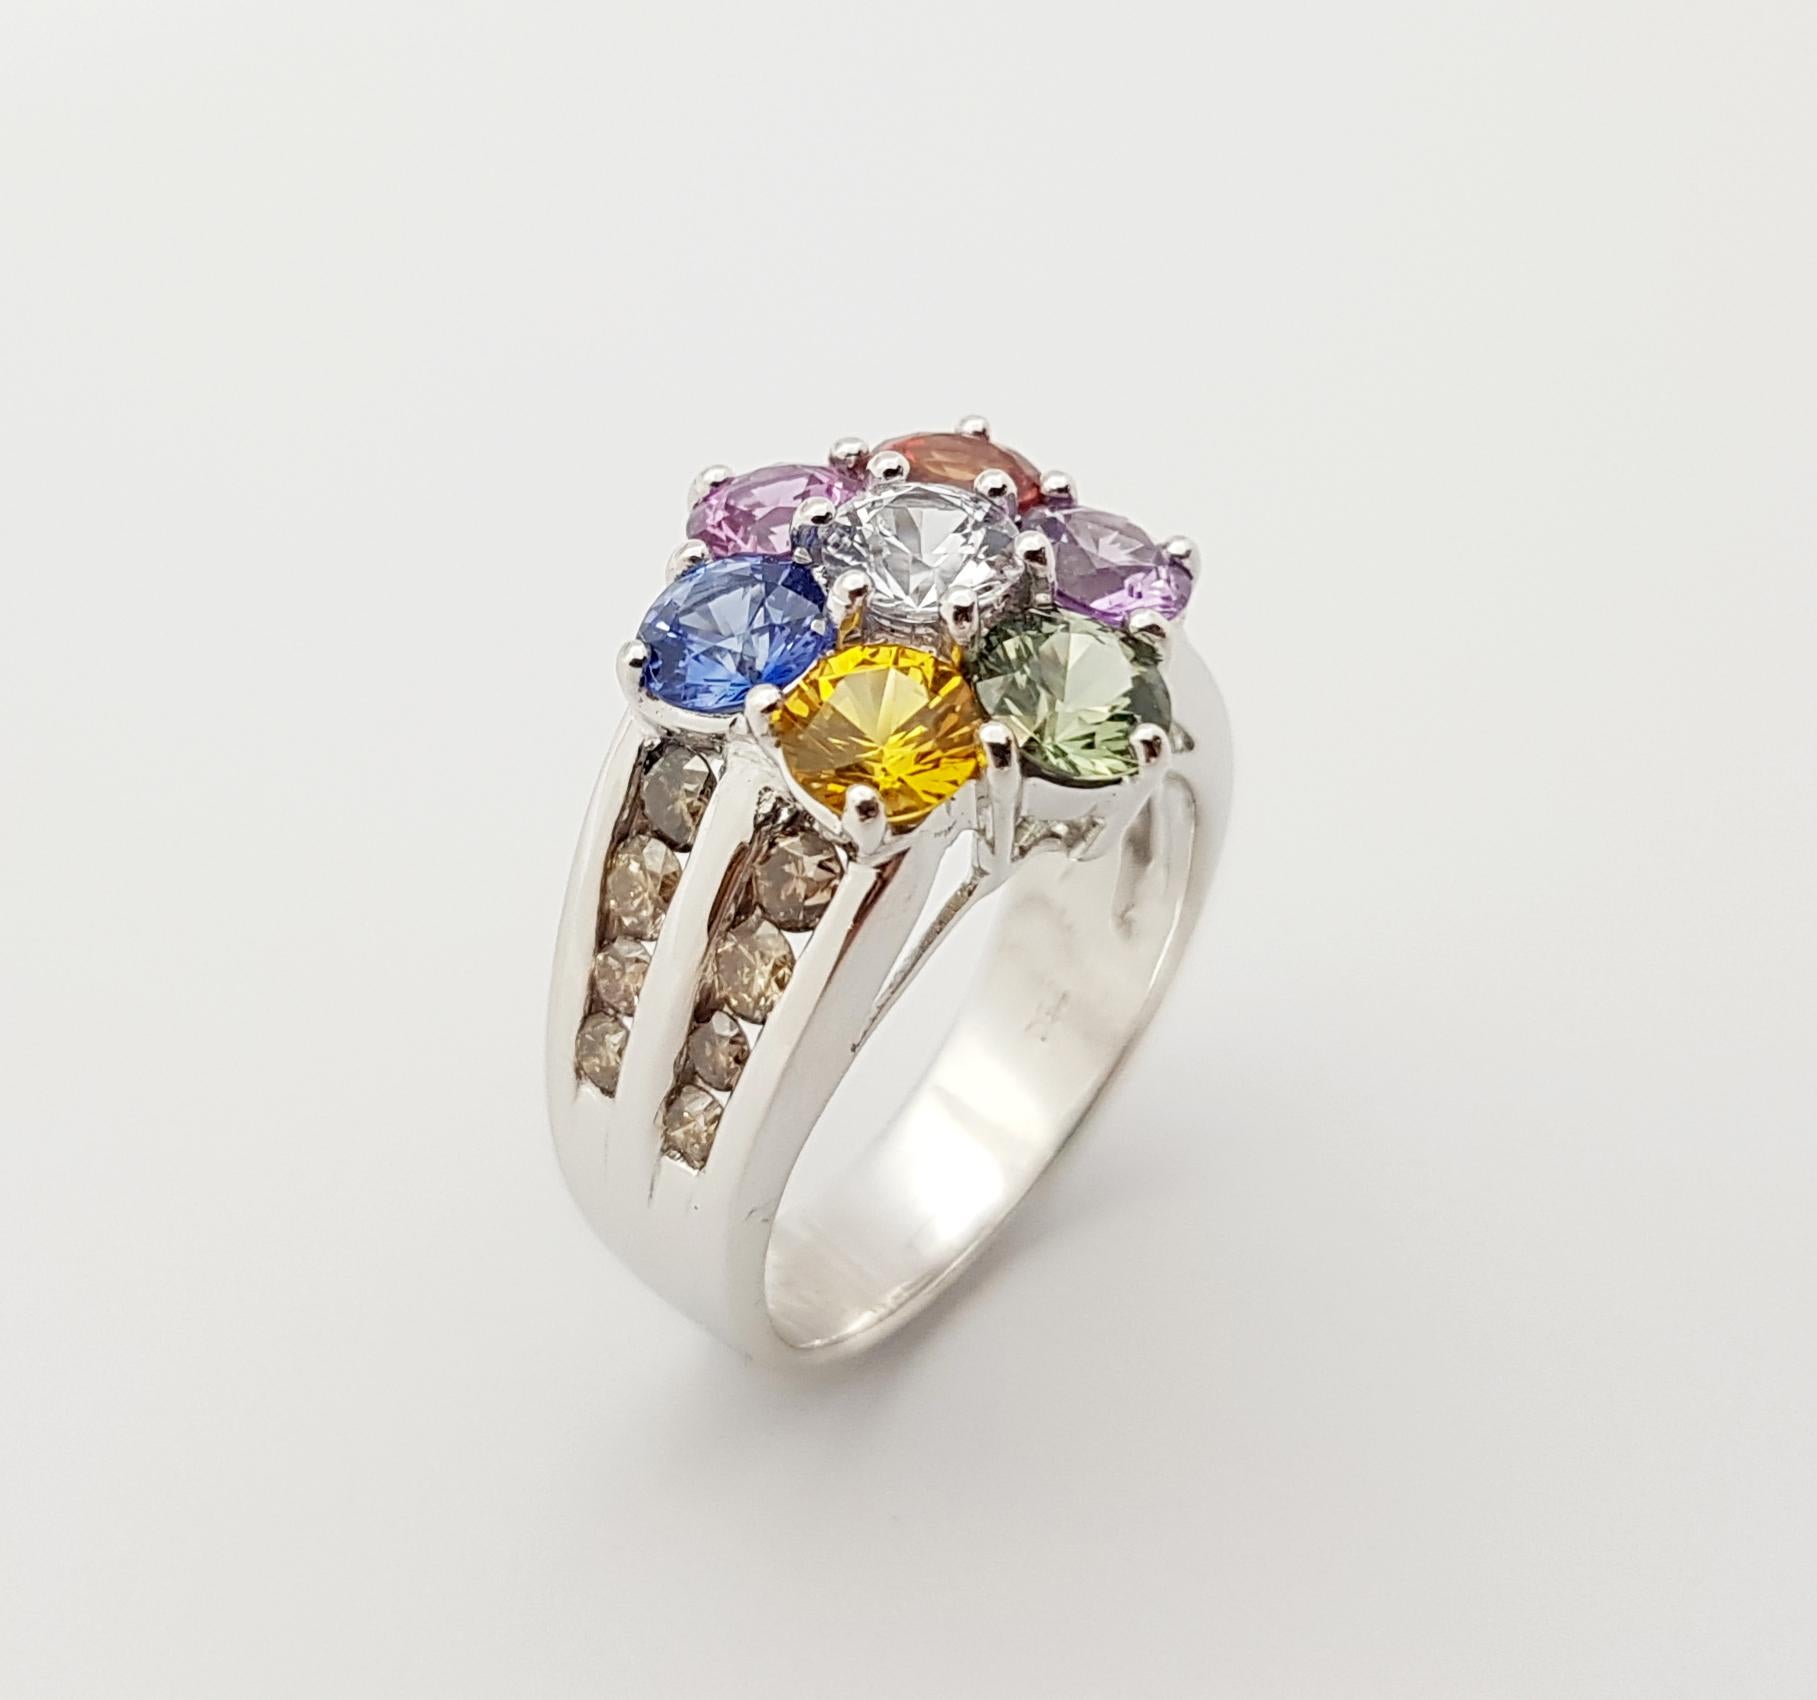 Rainbow Color Sapphire with Brown Diamond Ring Set in 18 Karat White Gold Set For Sale 2